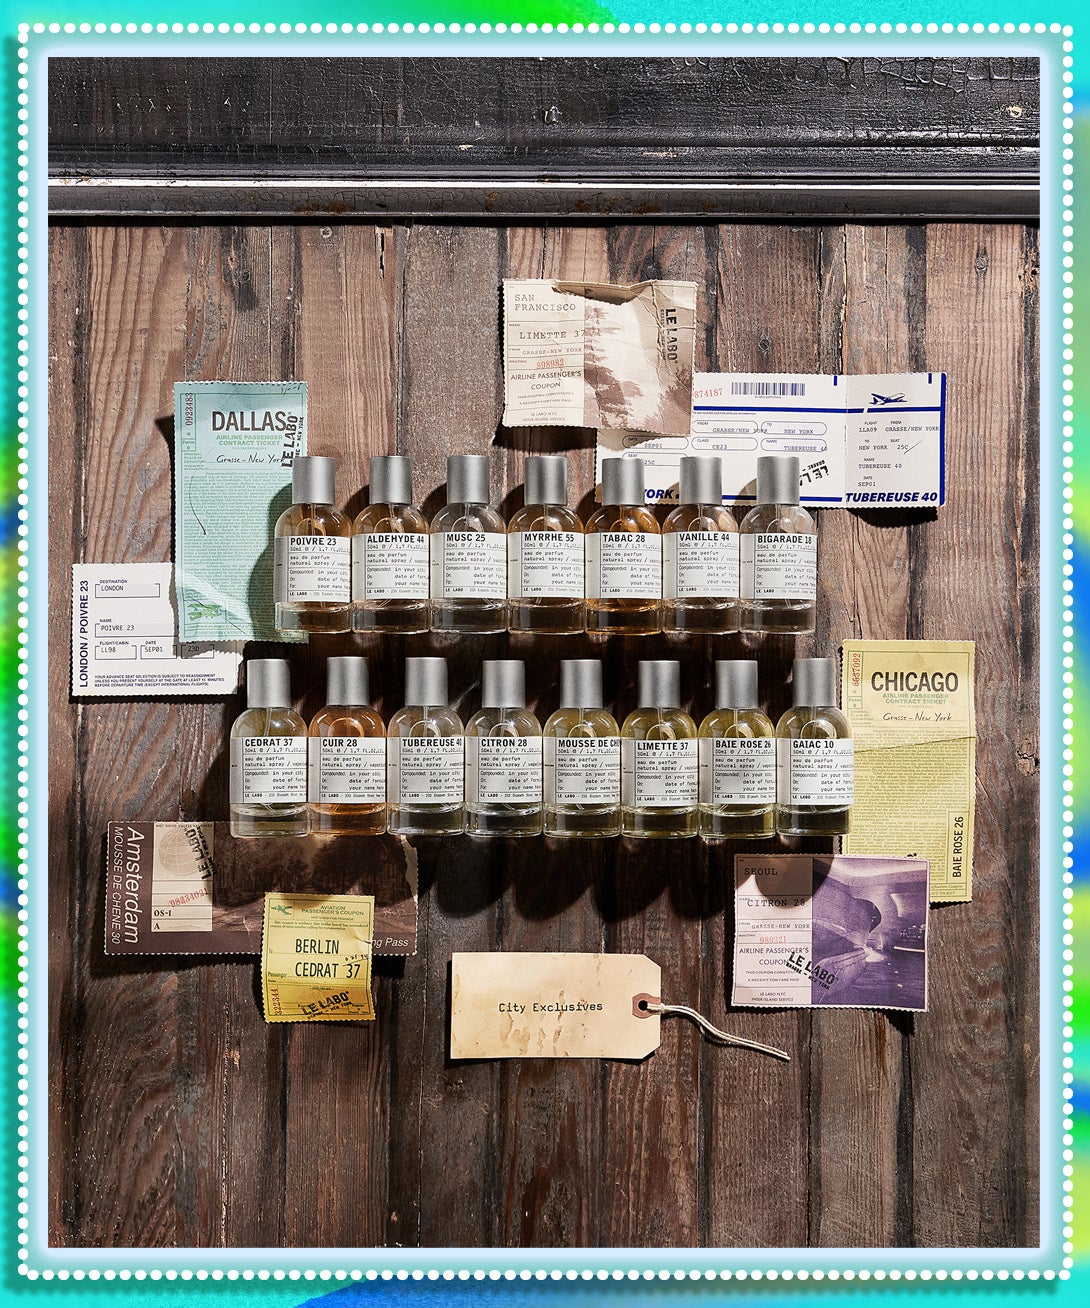 Which Le Labo City Exclusive Perfume Are You?